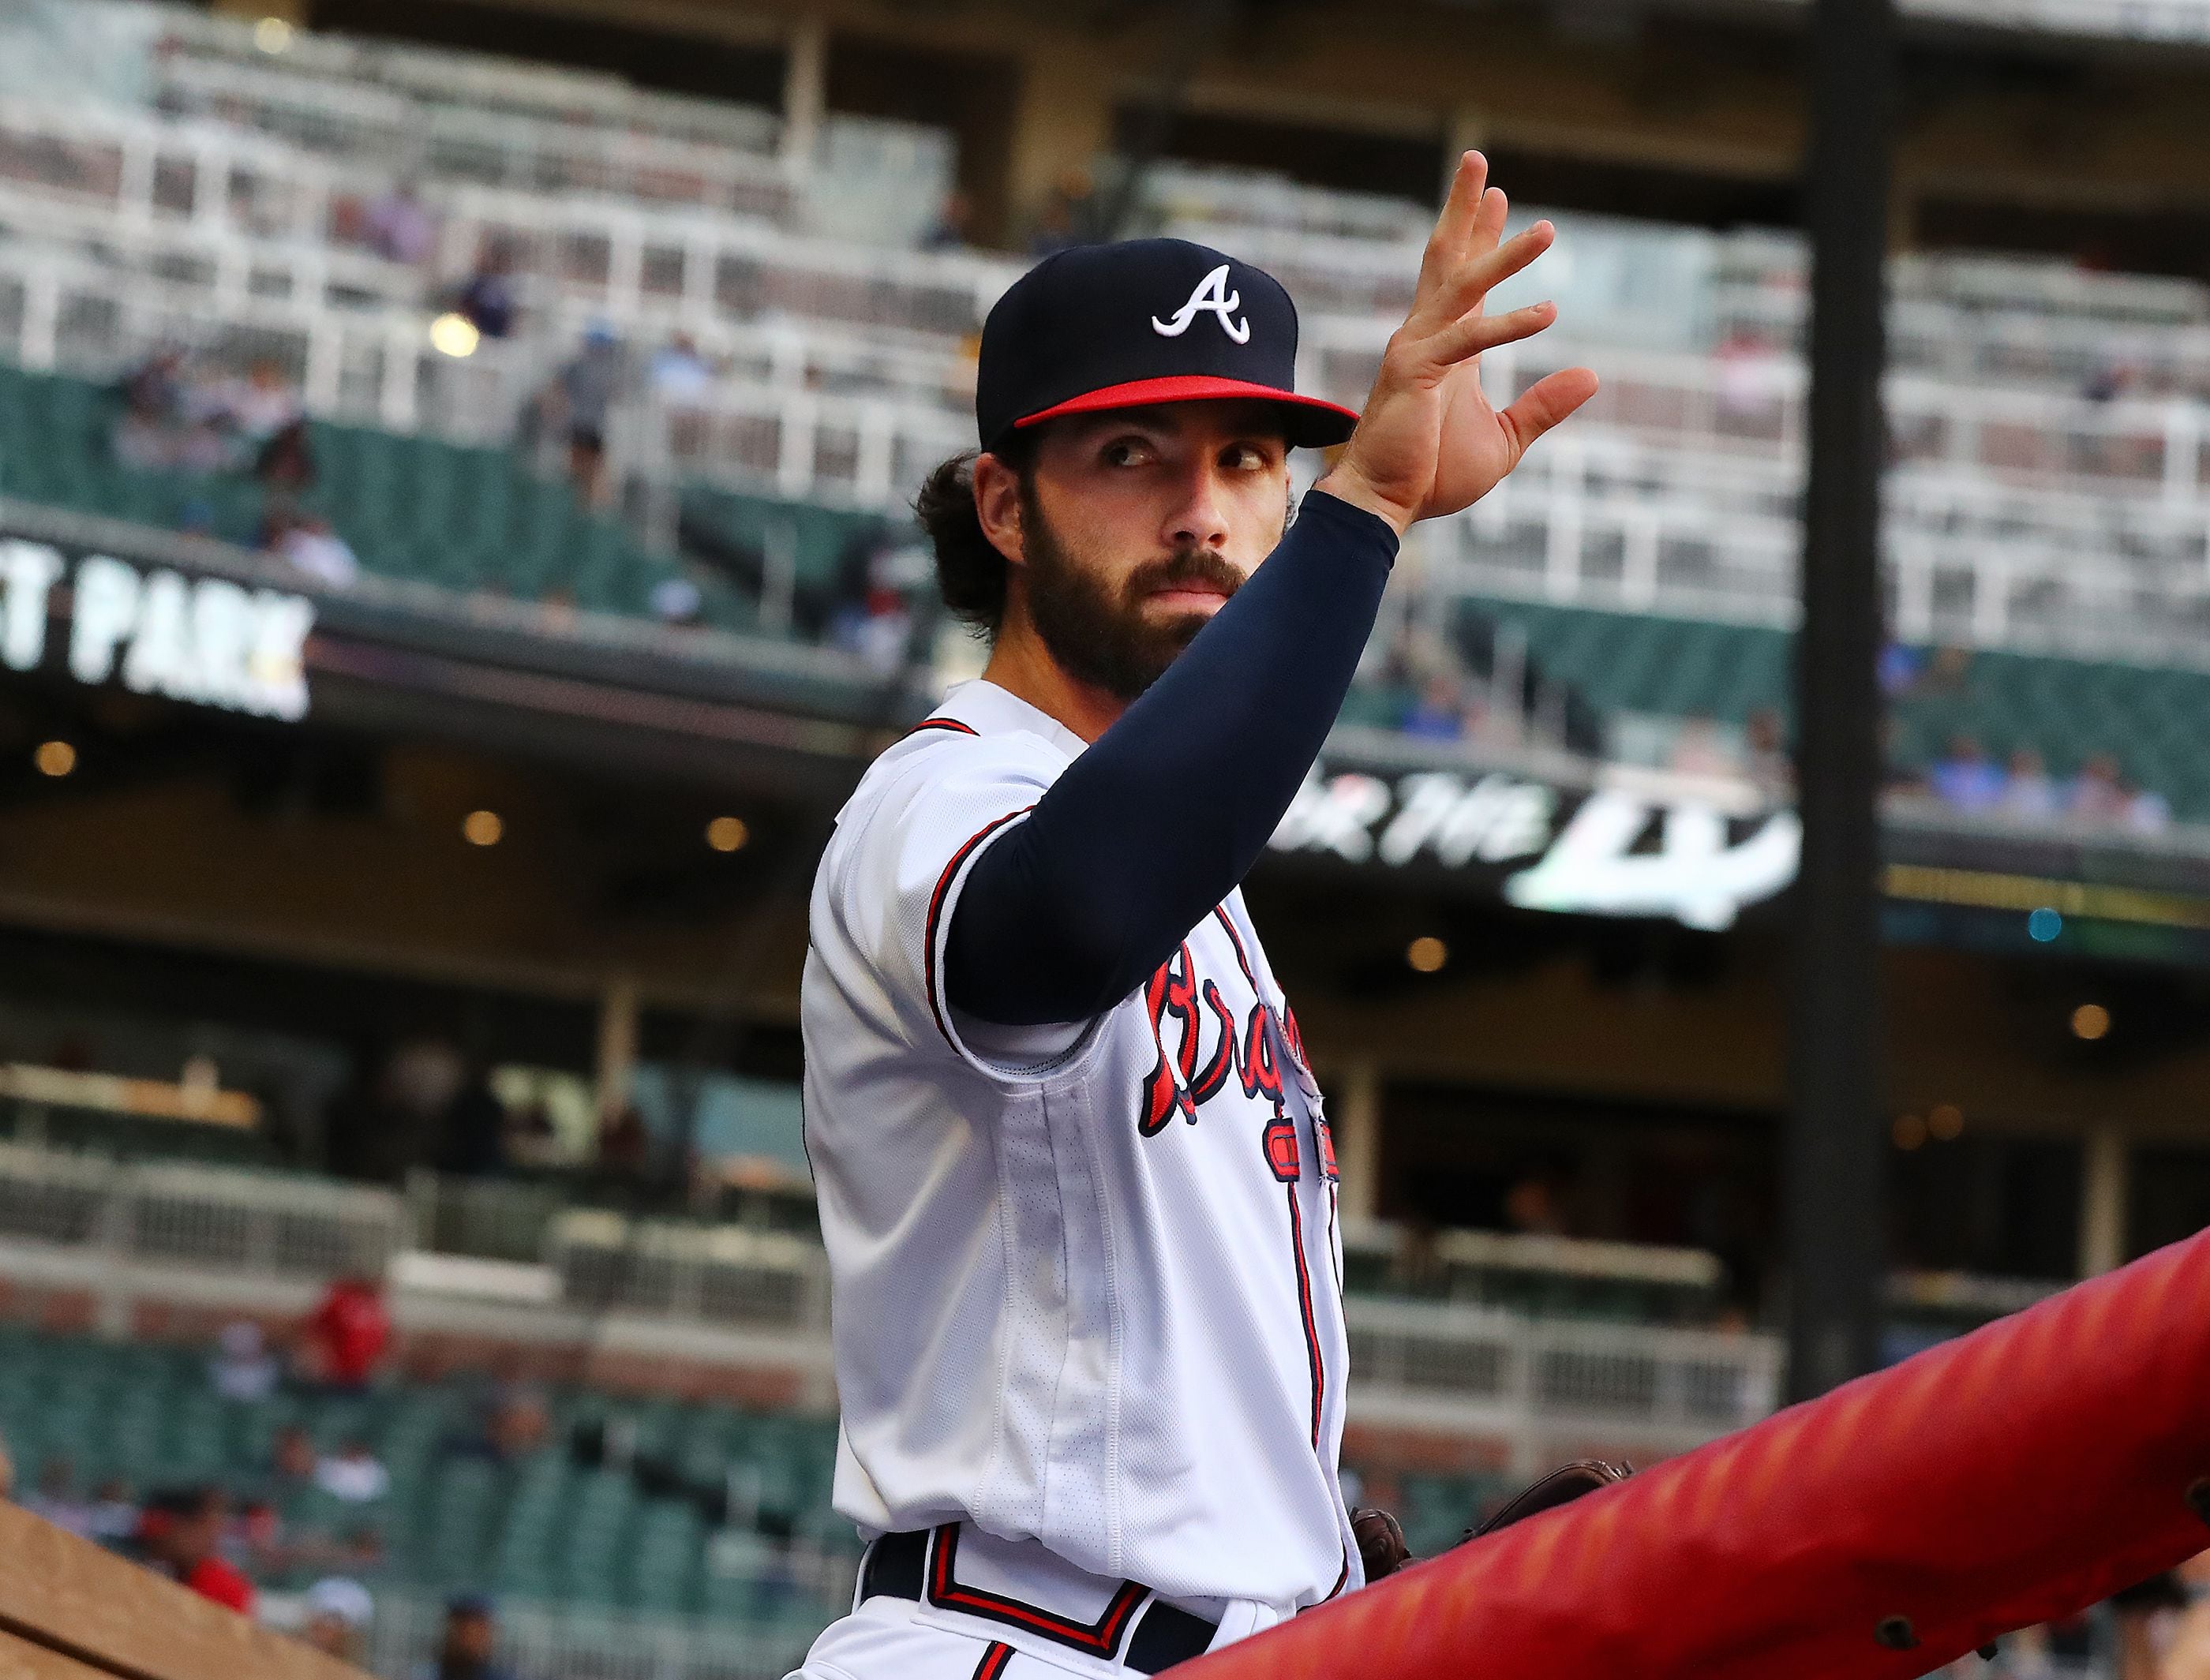 Cubs star Dansby Swanson's influence still felt on Braves — and vice versa  - Chicago Sun-Times